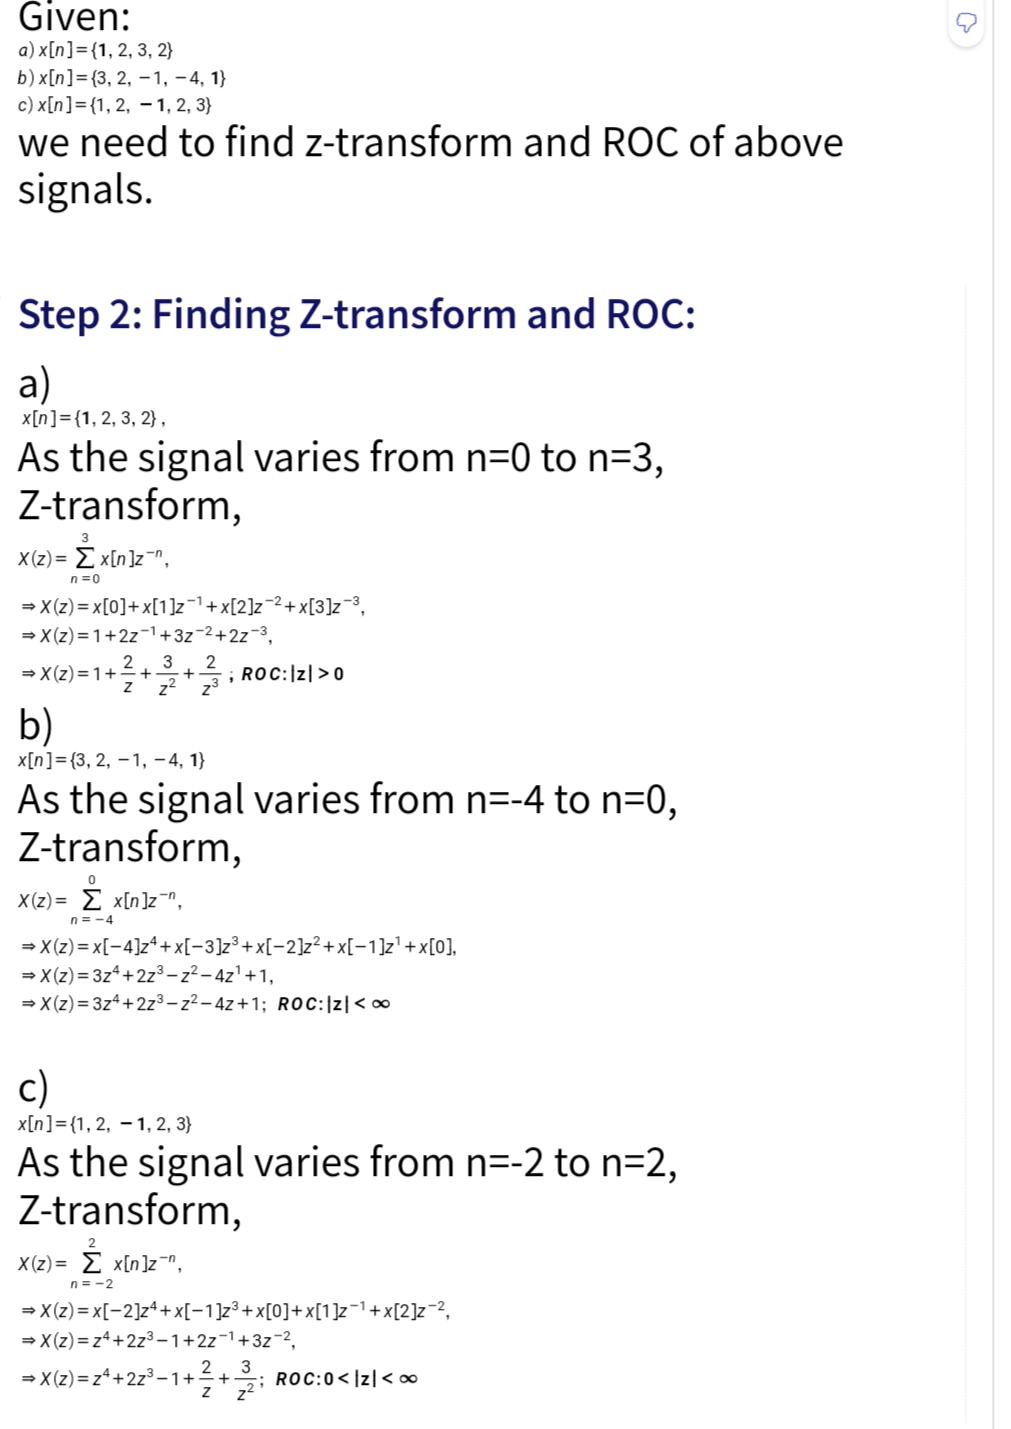 Given:
a) x[n] = {1, 2, 3, 2}
b) x[n] = {3, 2,-1,-4, 1}
c) x[n] = {1, 2, 1, 2, 3)
we need to find z-transform and ROC of above
signals.
Step 2: Finding Z-transform and ROC:
a)
x[n] = {1, 2, 3, 2},
As the signal varies from n=0 to n=3,
Z-transform,
X(z)= Σx[n]z",
3
n=0
→X(z)=x[0]+x[1]z¯¹+x[2]z−²+x[3]z-³,
⇒X(z)=1+2z1+3z-2+2z-3,
2
1 + ²/3 + 2/2 + 1/3 ; ROC: |Z| > 0
⇒X(z)=1+
b)
x[n] = {3, 2, 1, −4, 1}
As the signal varies from n=-4 to n=0,
Z-transform,
0
X(z)=x[n]z¯n,
n=-4
⇒X(z)=x[4]z + x[−3]z³+x[−2]z²+x[-1]z¹+x[0],
⇒X(z)=3z4+2z³-z²-4z¹+1,
⇒X(z)=3z4+2z³-z²-4z+1; ROC: |Z| <∞
c)
x[n] = {1, 2, 1, 2, 3)
As the signal varies from n=-2 to n=2,
Z-transform,
2
X(z)= Σ x[n]z¯n,
n=-2
⇒X(z)=x[-2]z4+x[−1]z³+x[0]+x[1]z−¹+x[2]z¯²,
⇒X(z)=z4+2z³-1+2z-¹+3z-²,
⇒X(z)=z4+2z³-1++; ROC:0<|z|<∞
3
Z z²